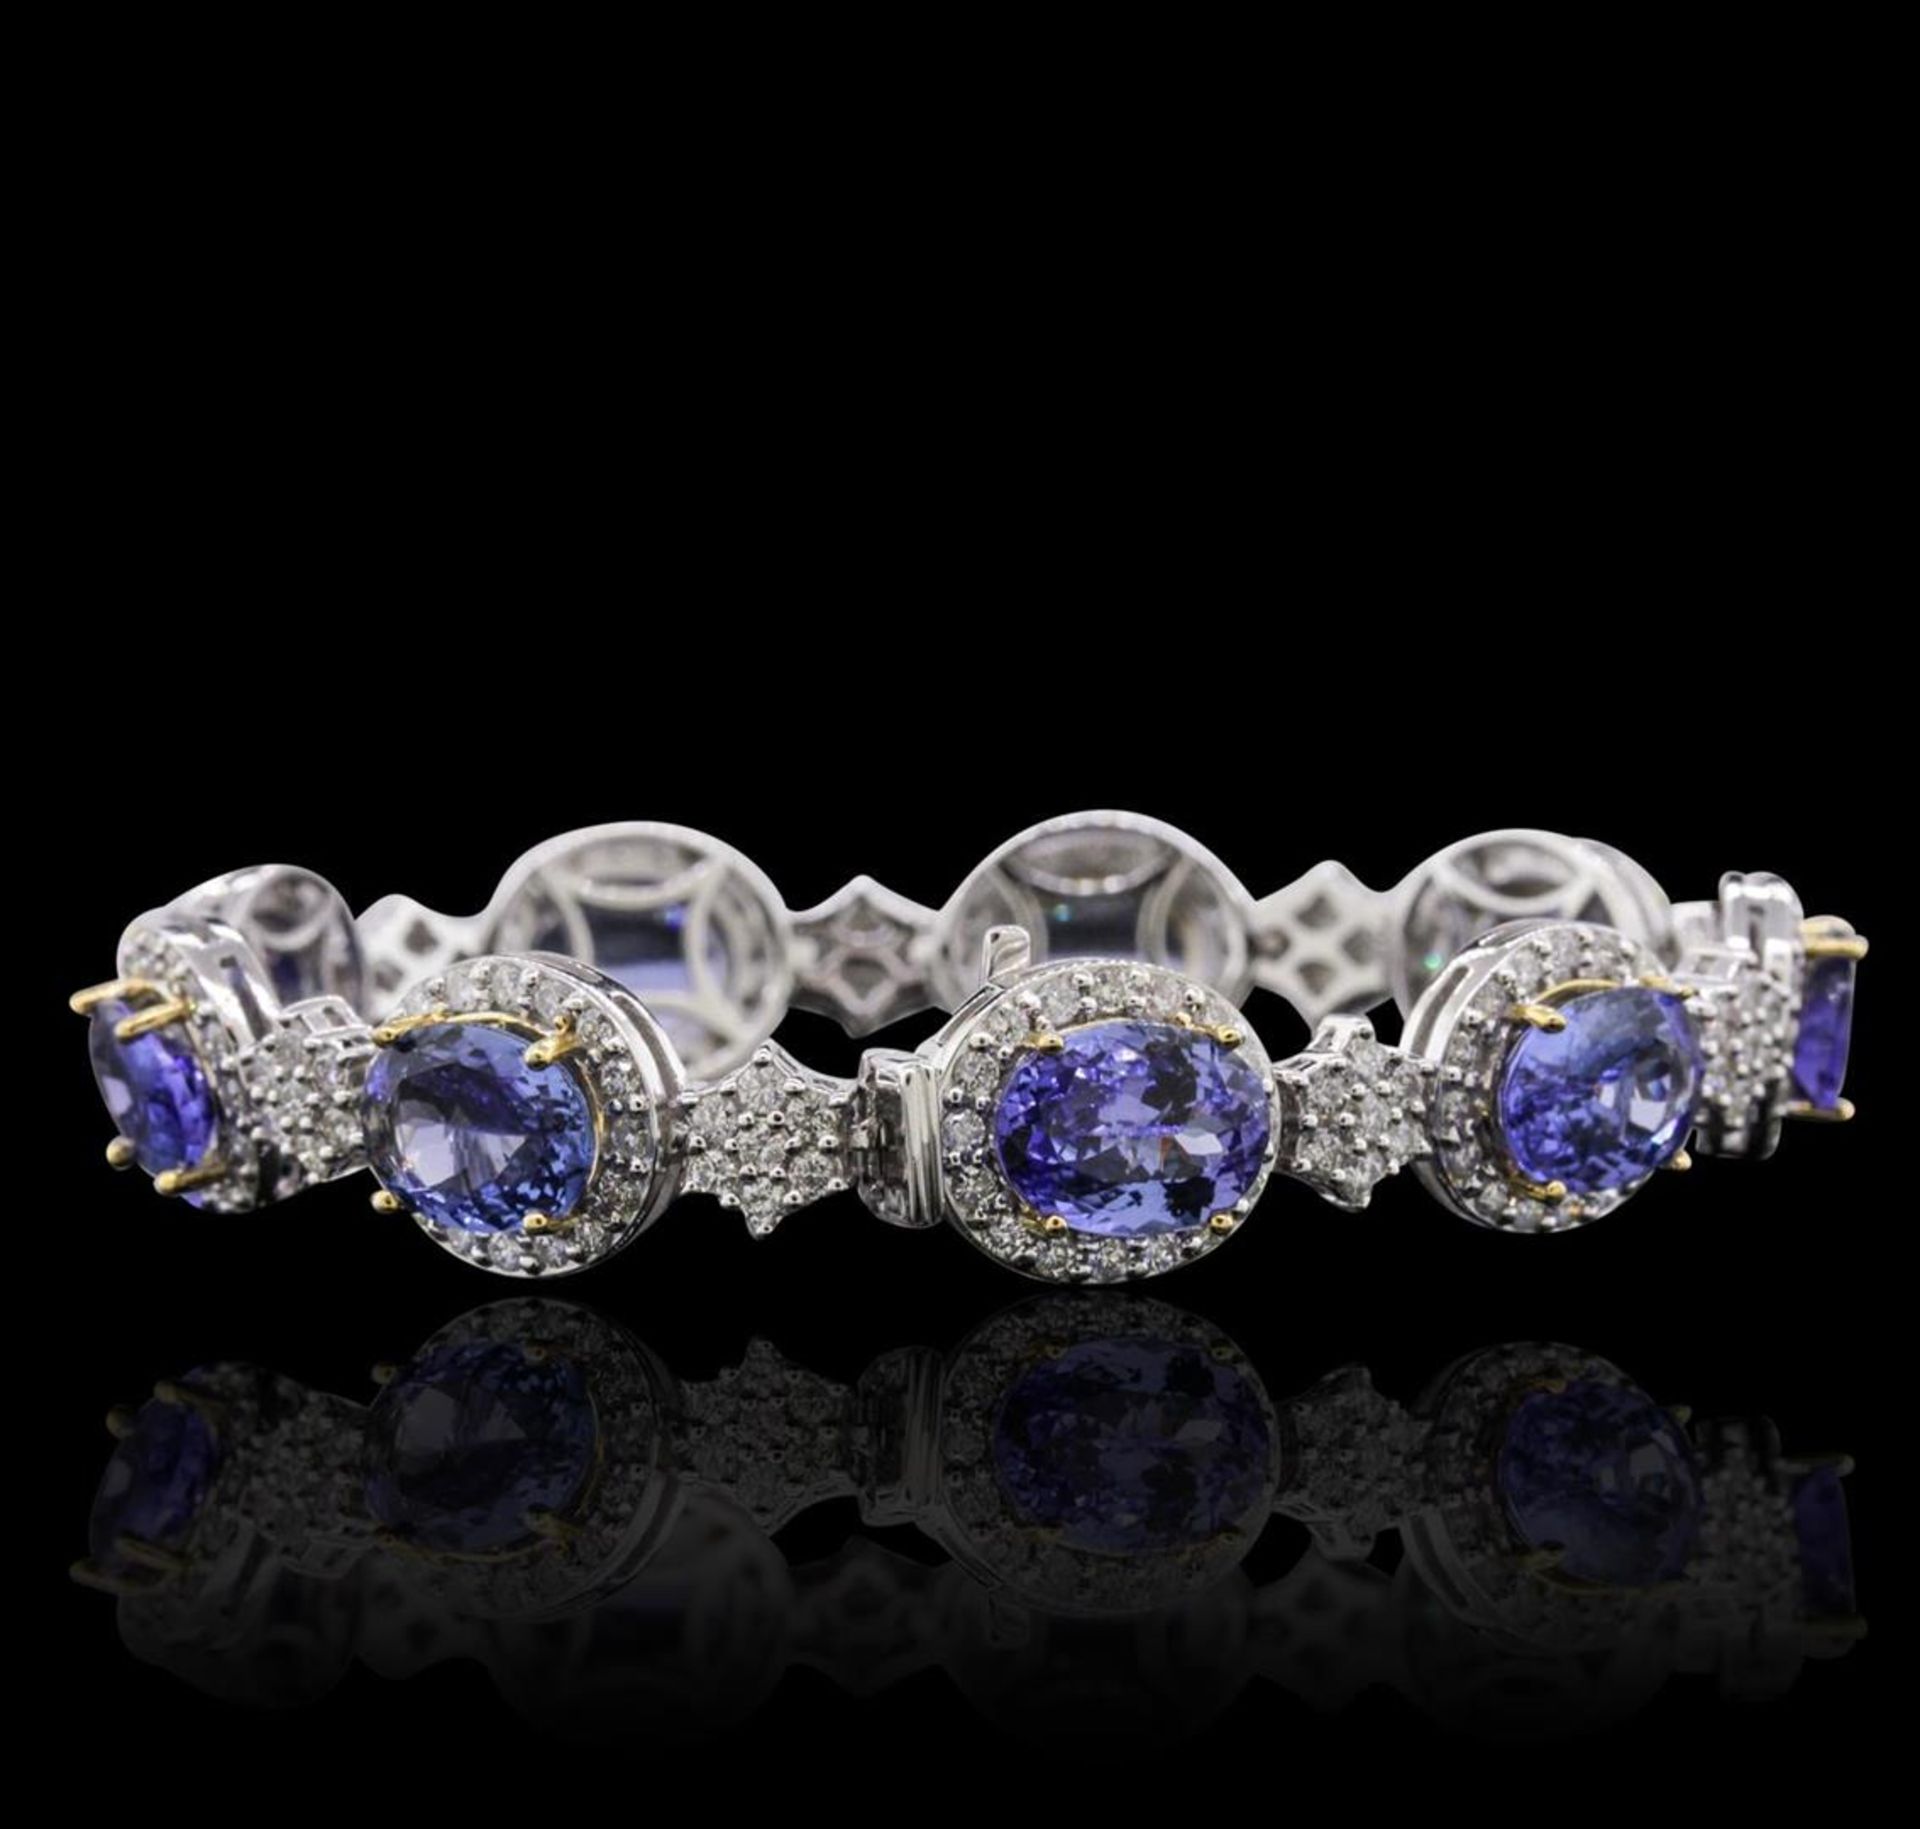 14KT Two-Tone Gold 25.74 ctw Tanzanite and Diamond Bracelet - Image 2 of 4